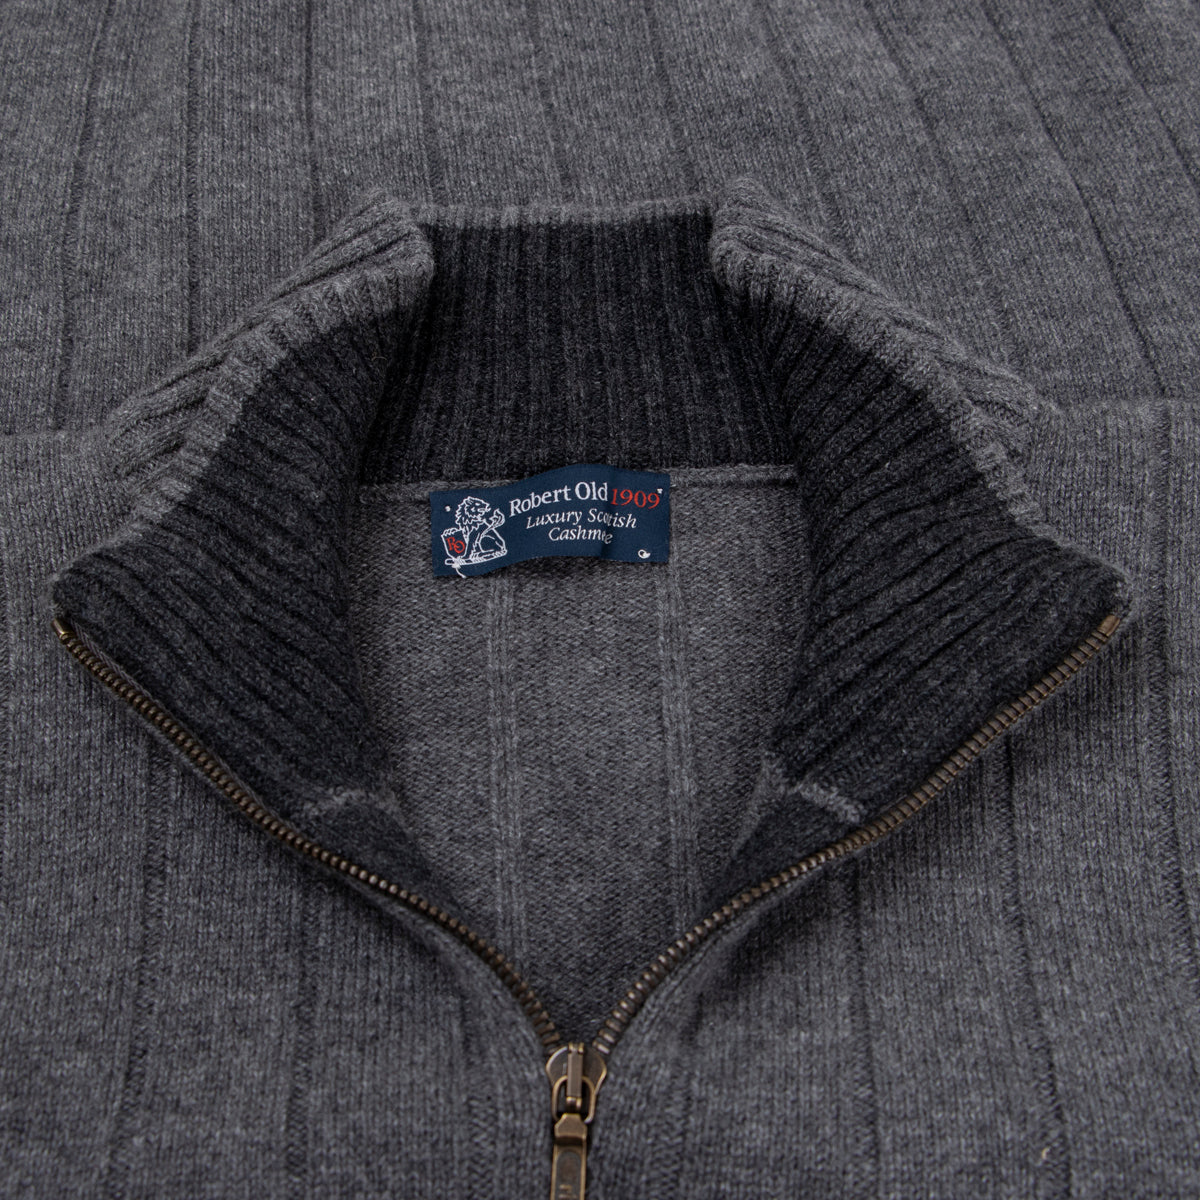 The Wellington Cashmere Ribbed Zip Neck Sweater - Smog / Charcoal  Robert Old   